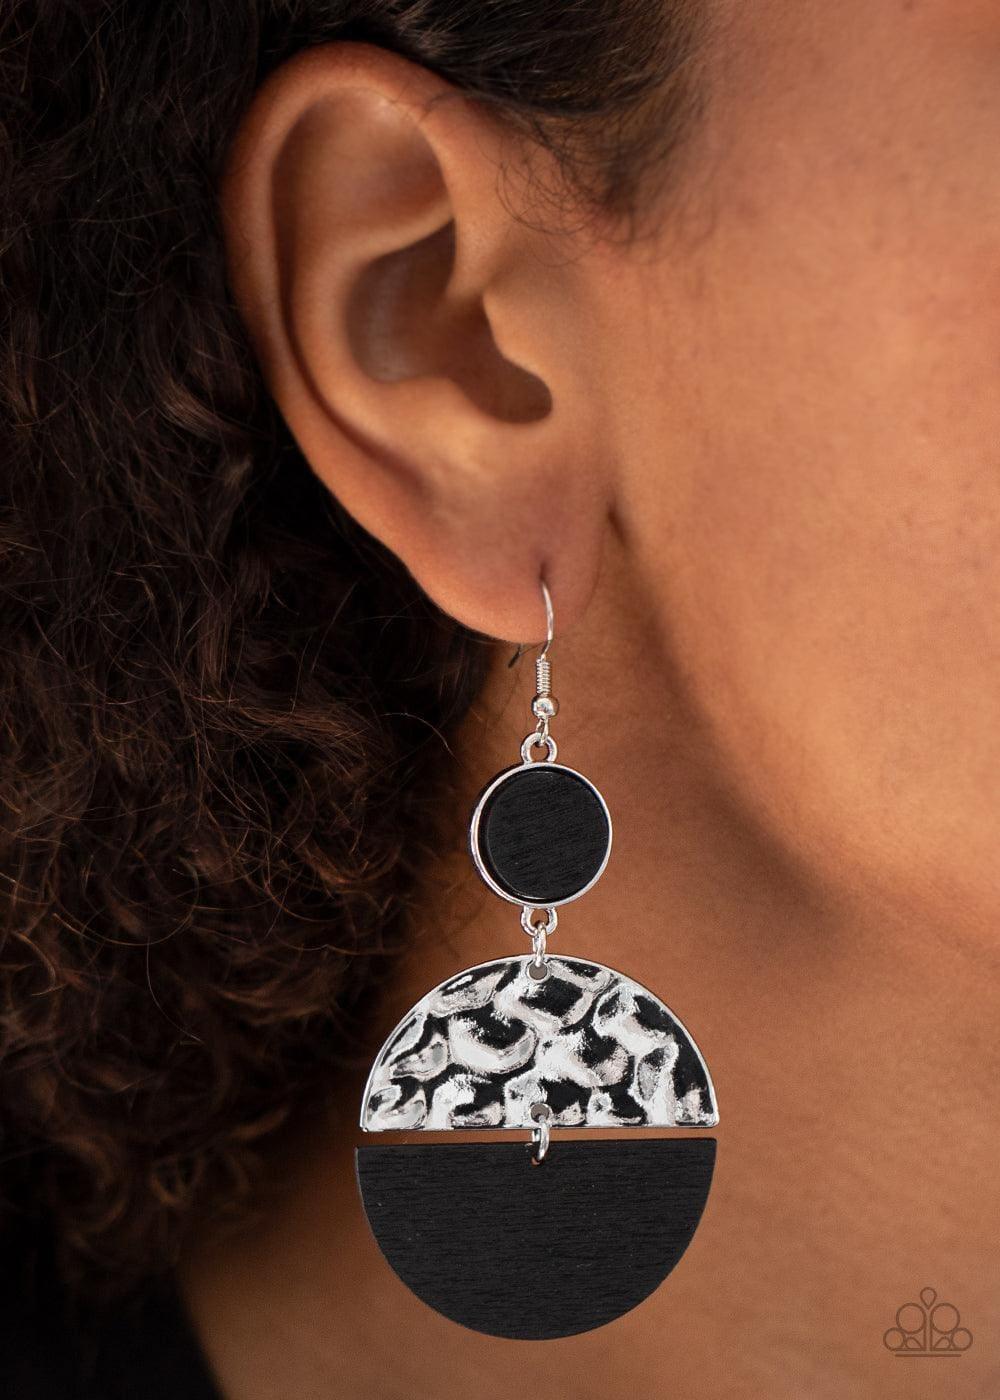 Paparazzi Accessories - Natural Element - Black Earrings - Bling by JessieK